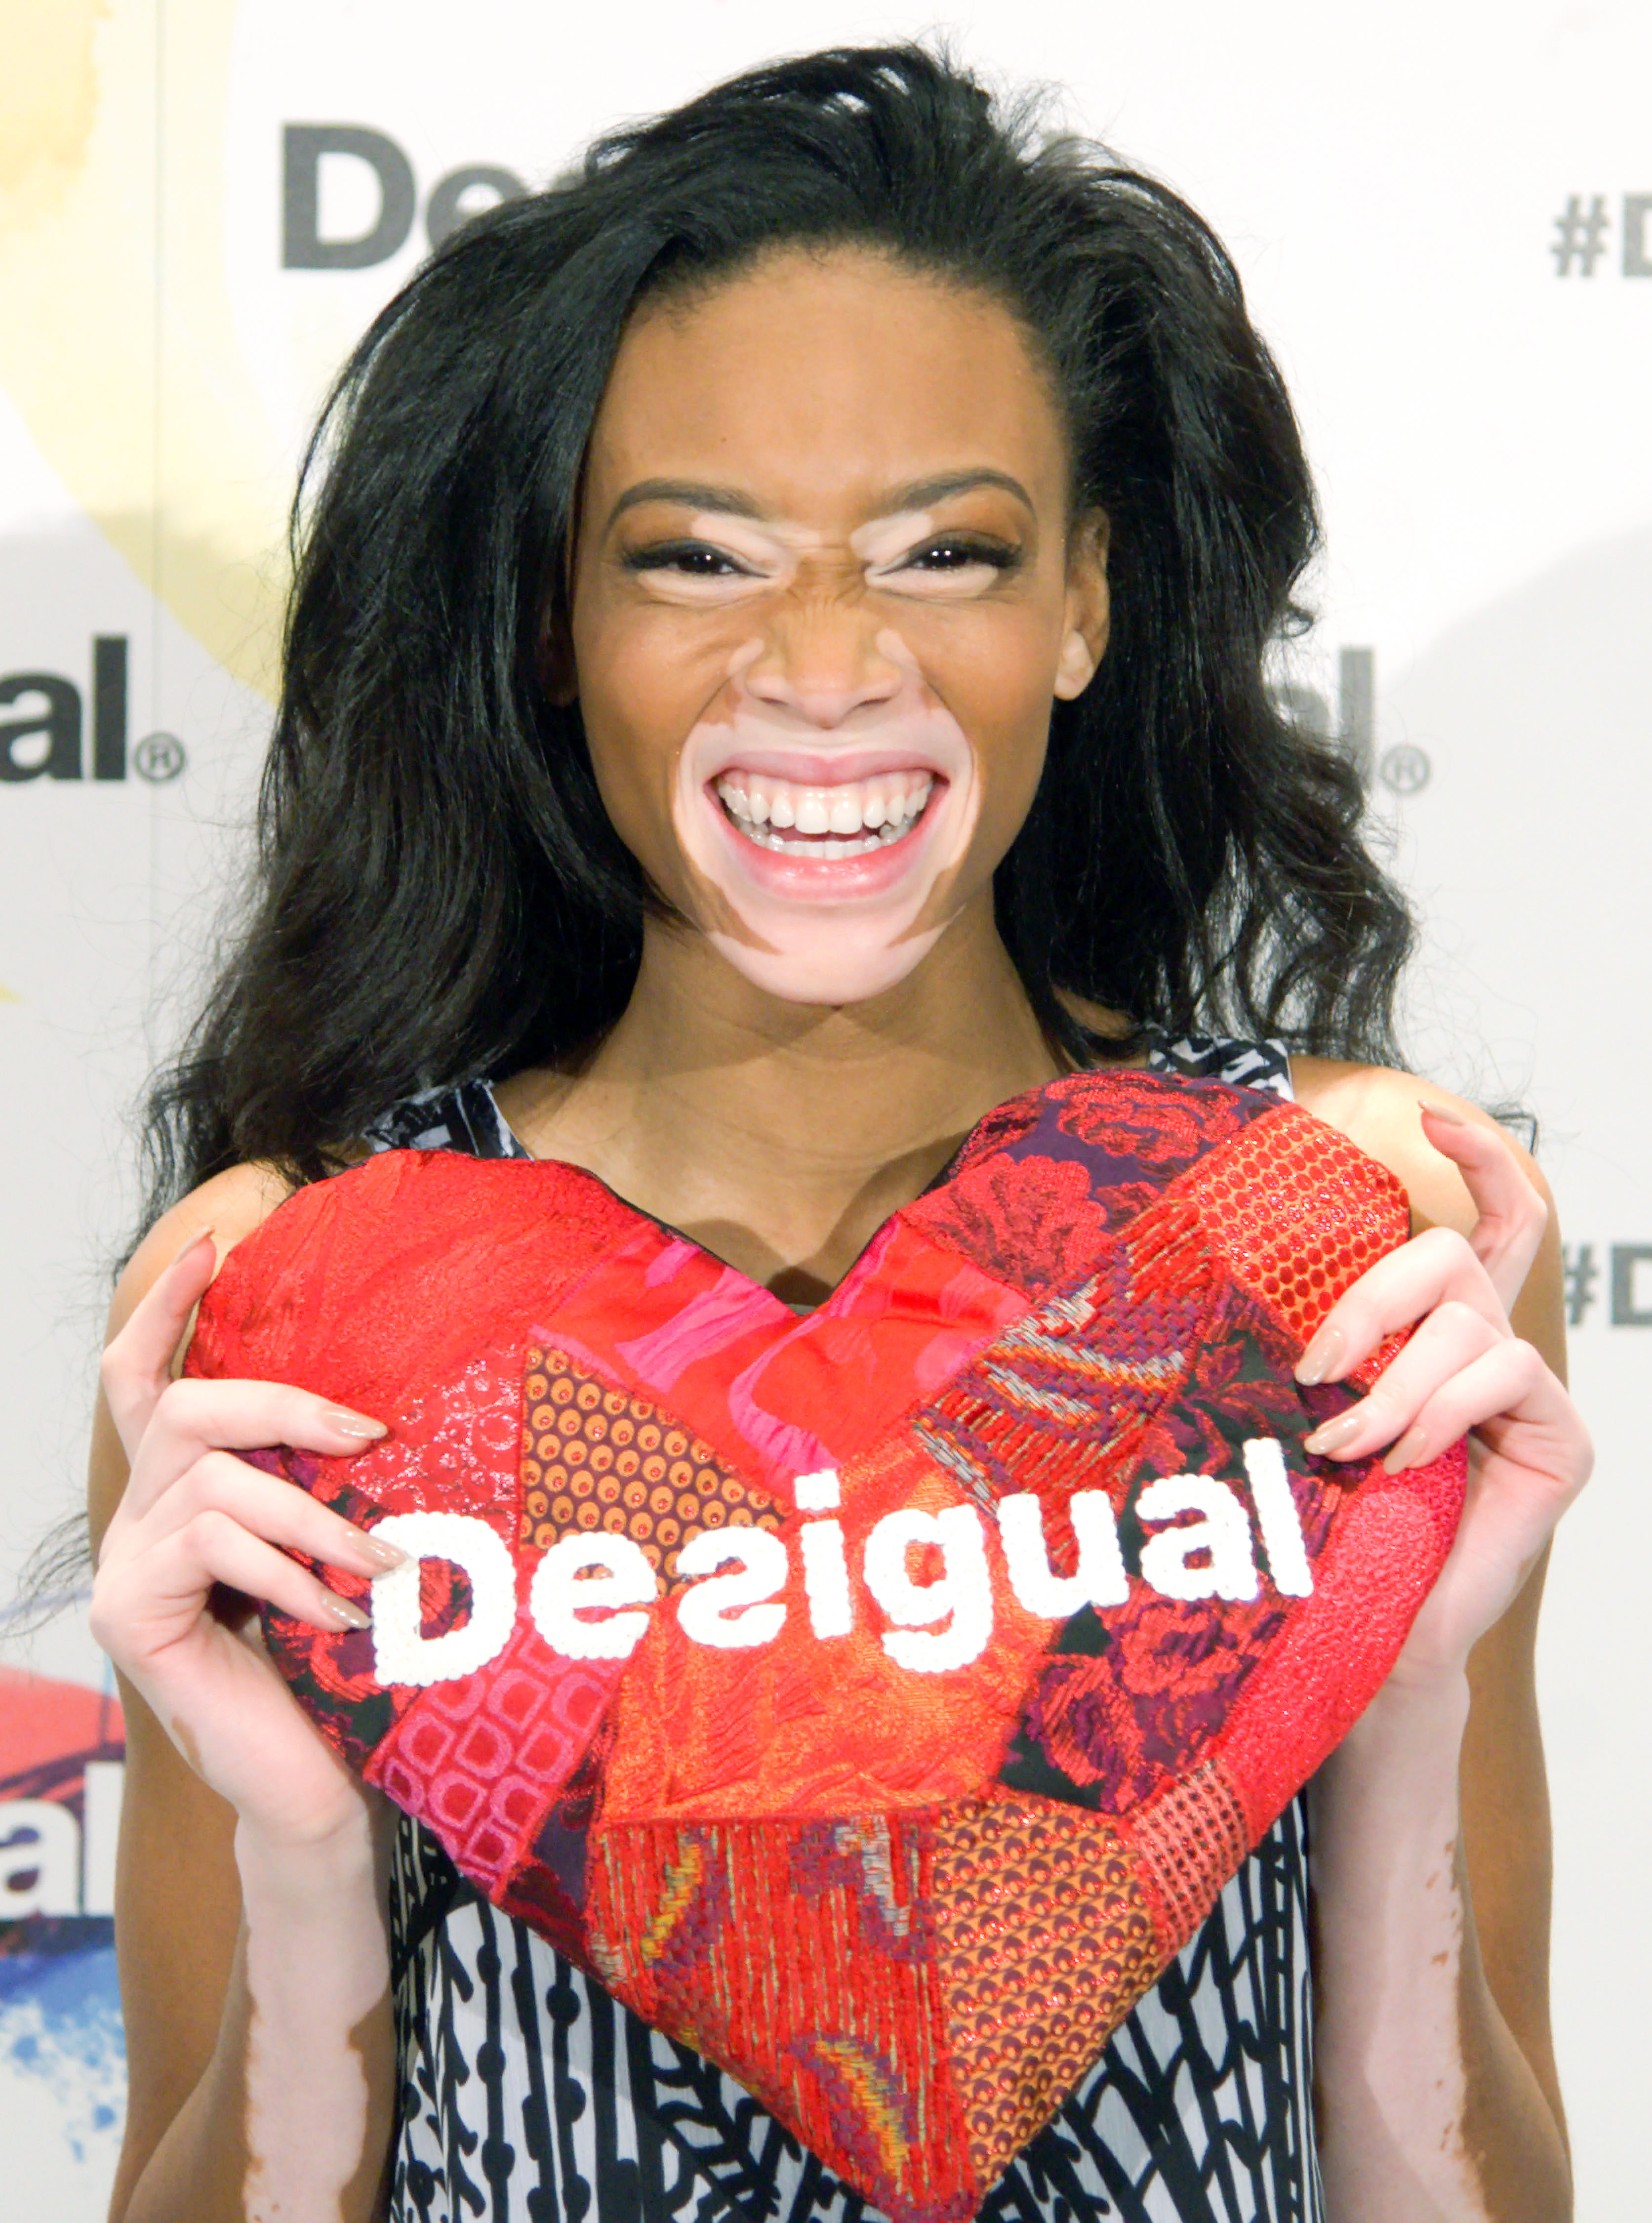 Winnie Harlow New Desigual Face For Spring 2015 Campaign